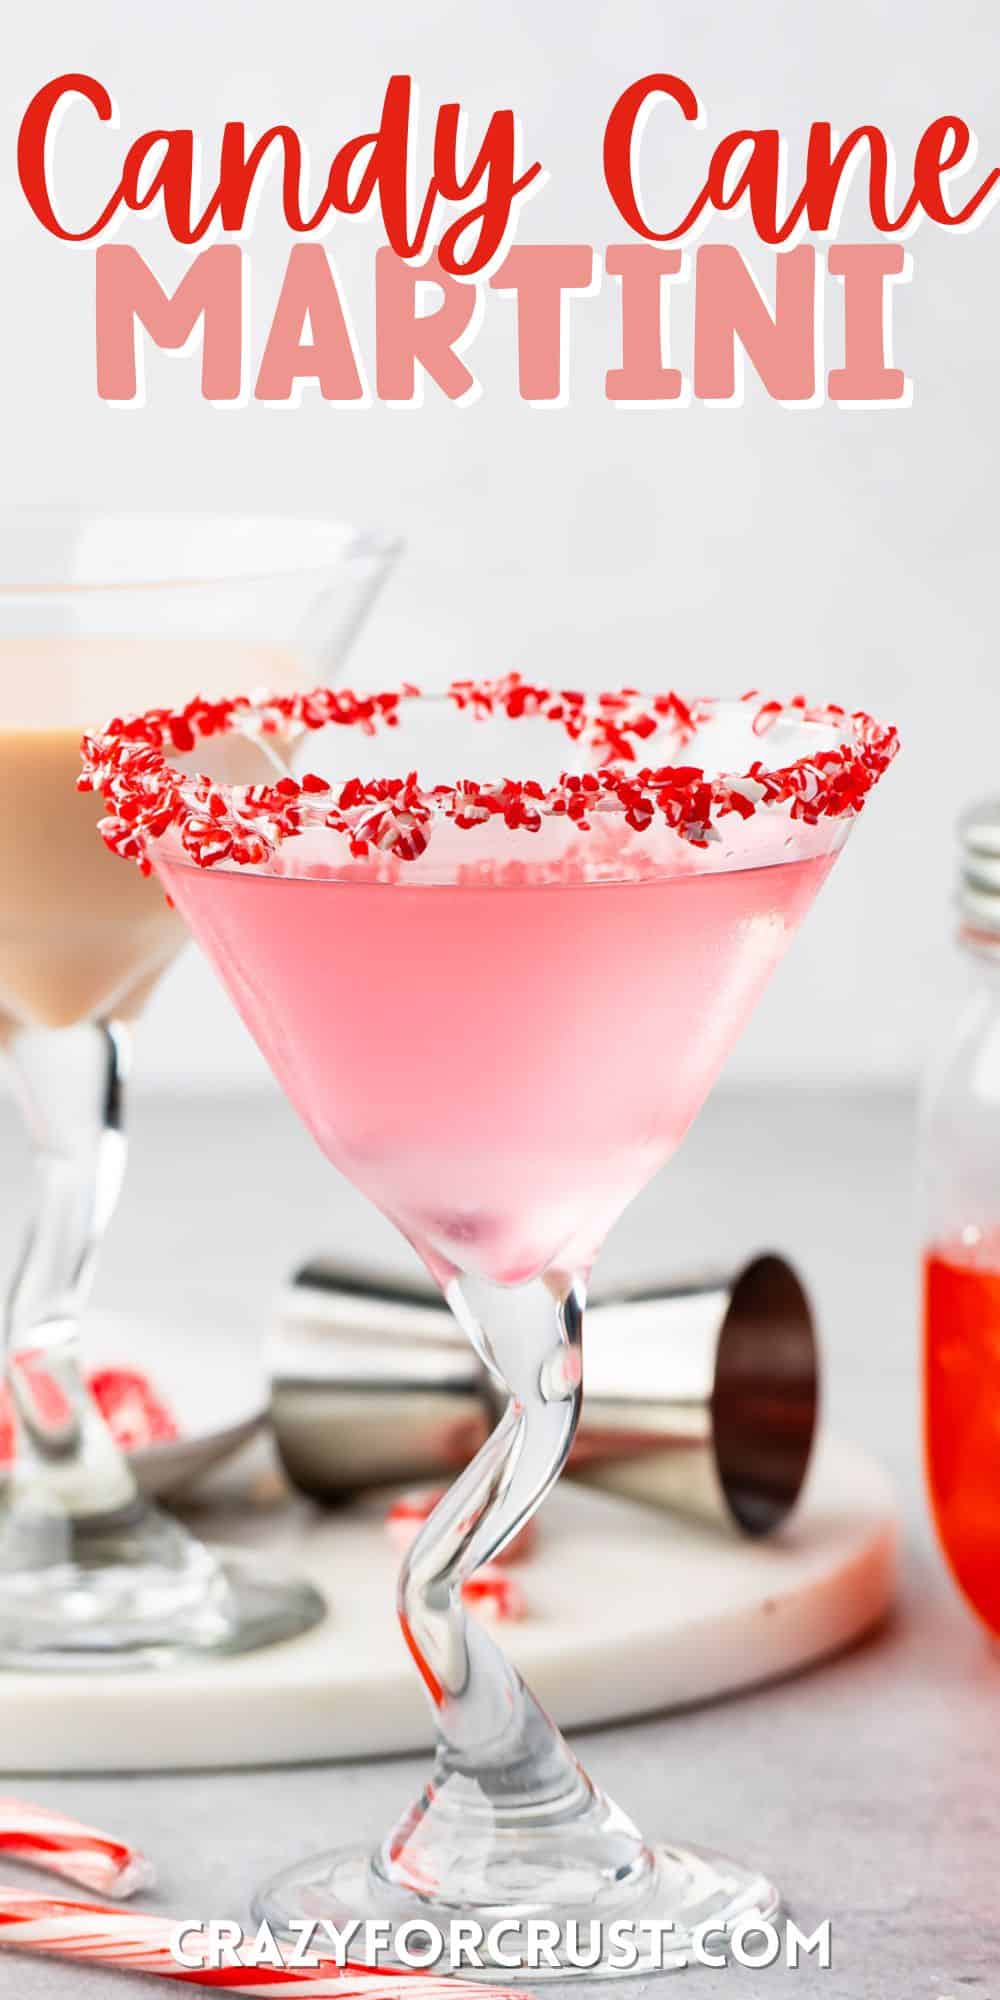 candy cane martini in a martini glass with crushed candy canes on the rim with words on top